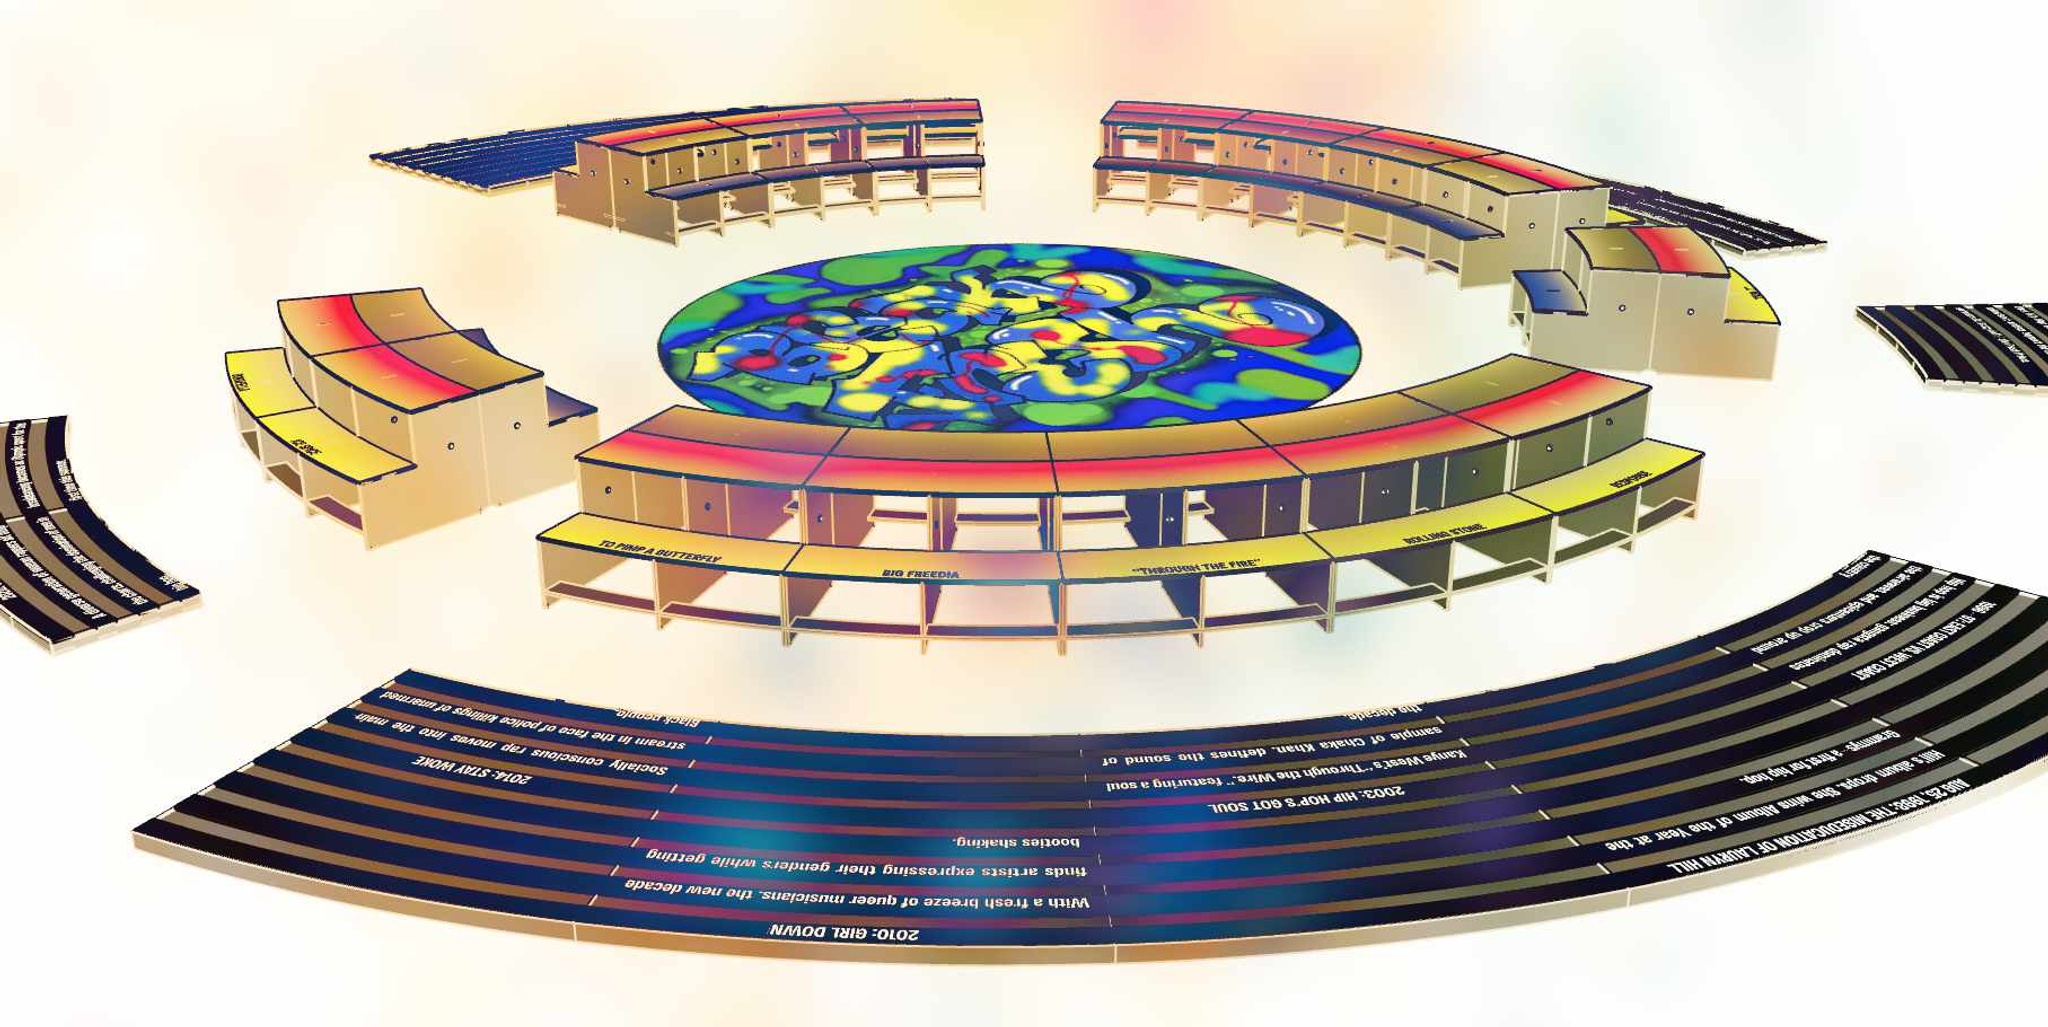 A rendering of an installation artwork that includes a central circular stage and low, bleacher-like seating that encircles the stage. The stage is decorated with a swirl of bright green, yellow, and blue colors. 